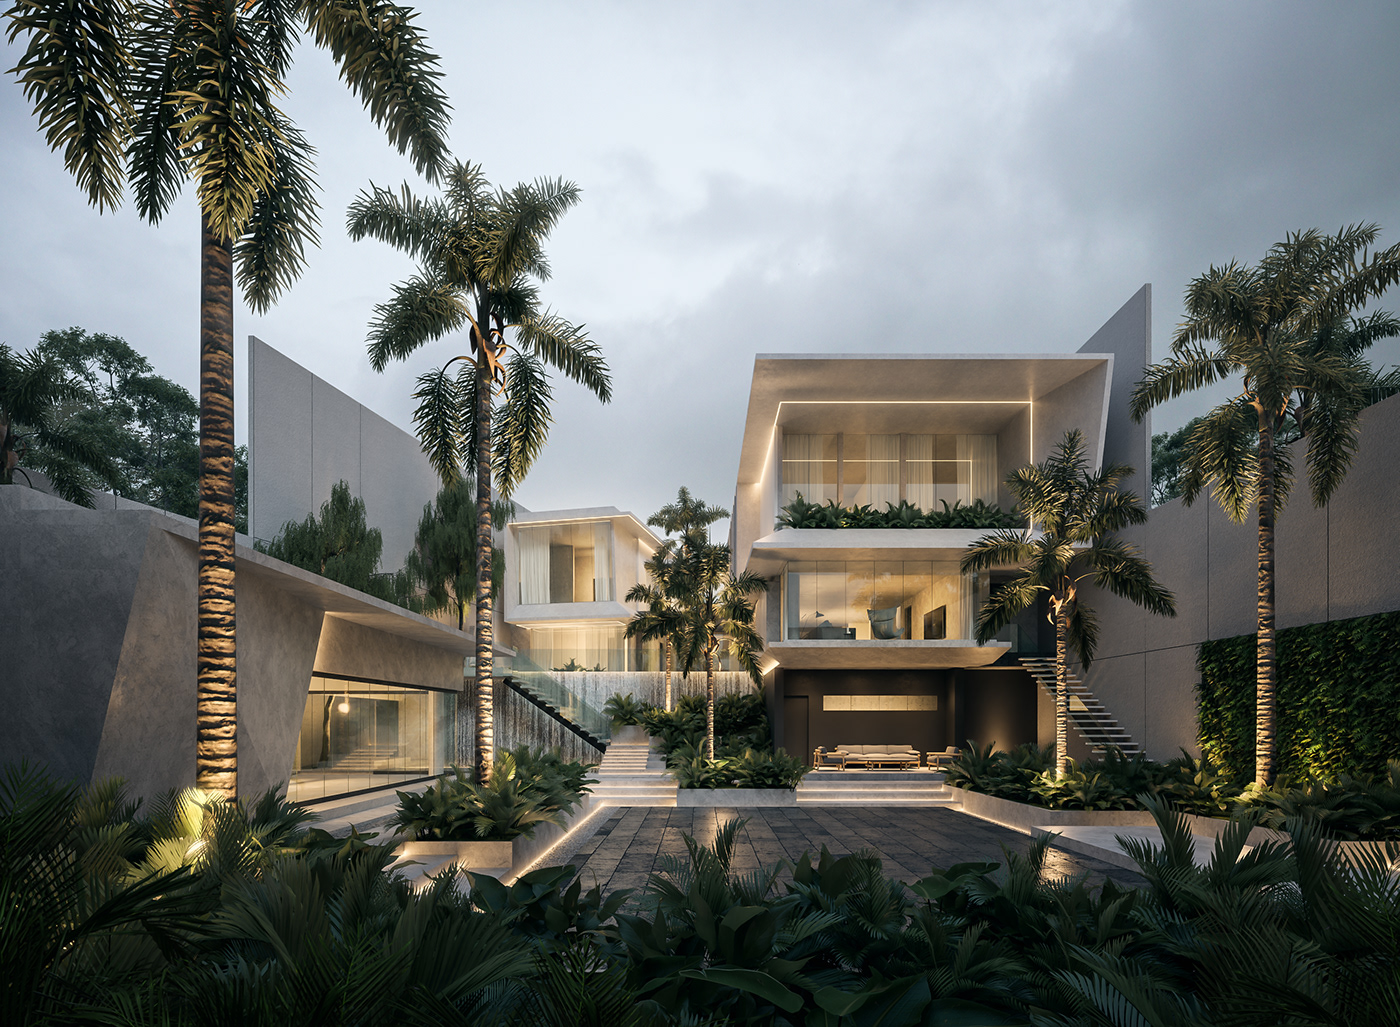 3D architecture CG CGI design house Render residential visual visualization